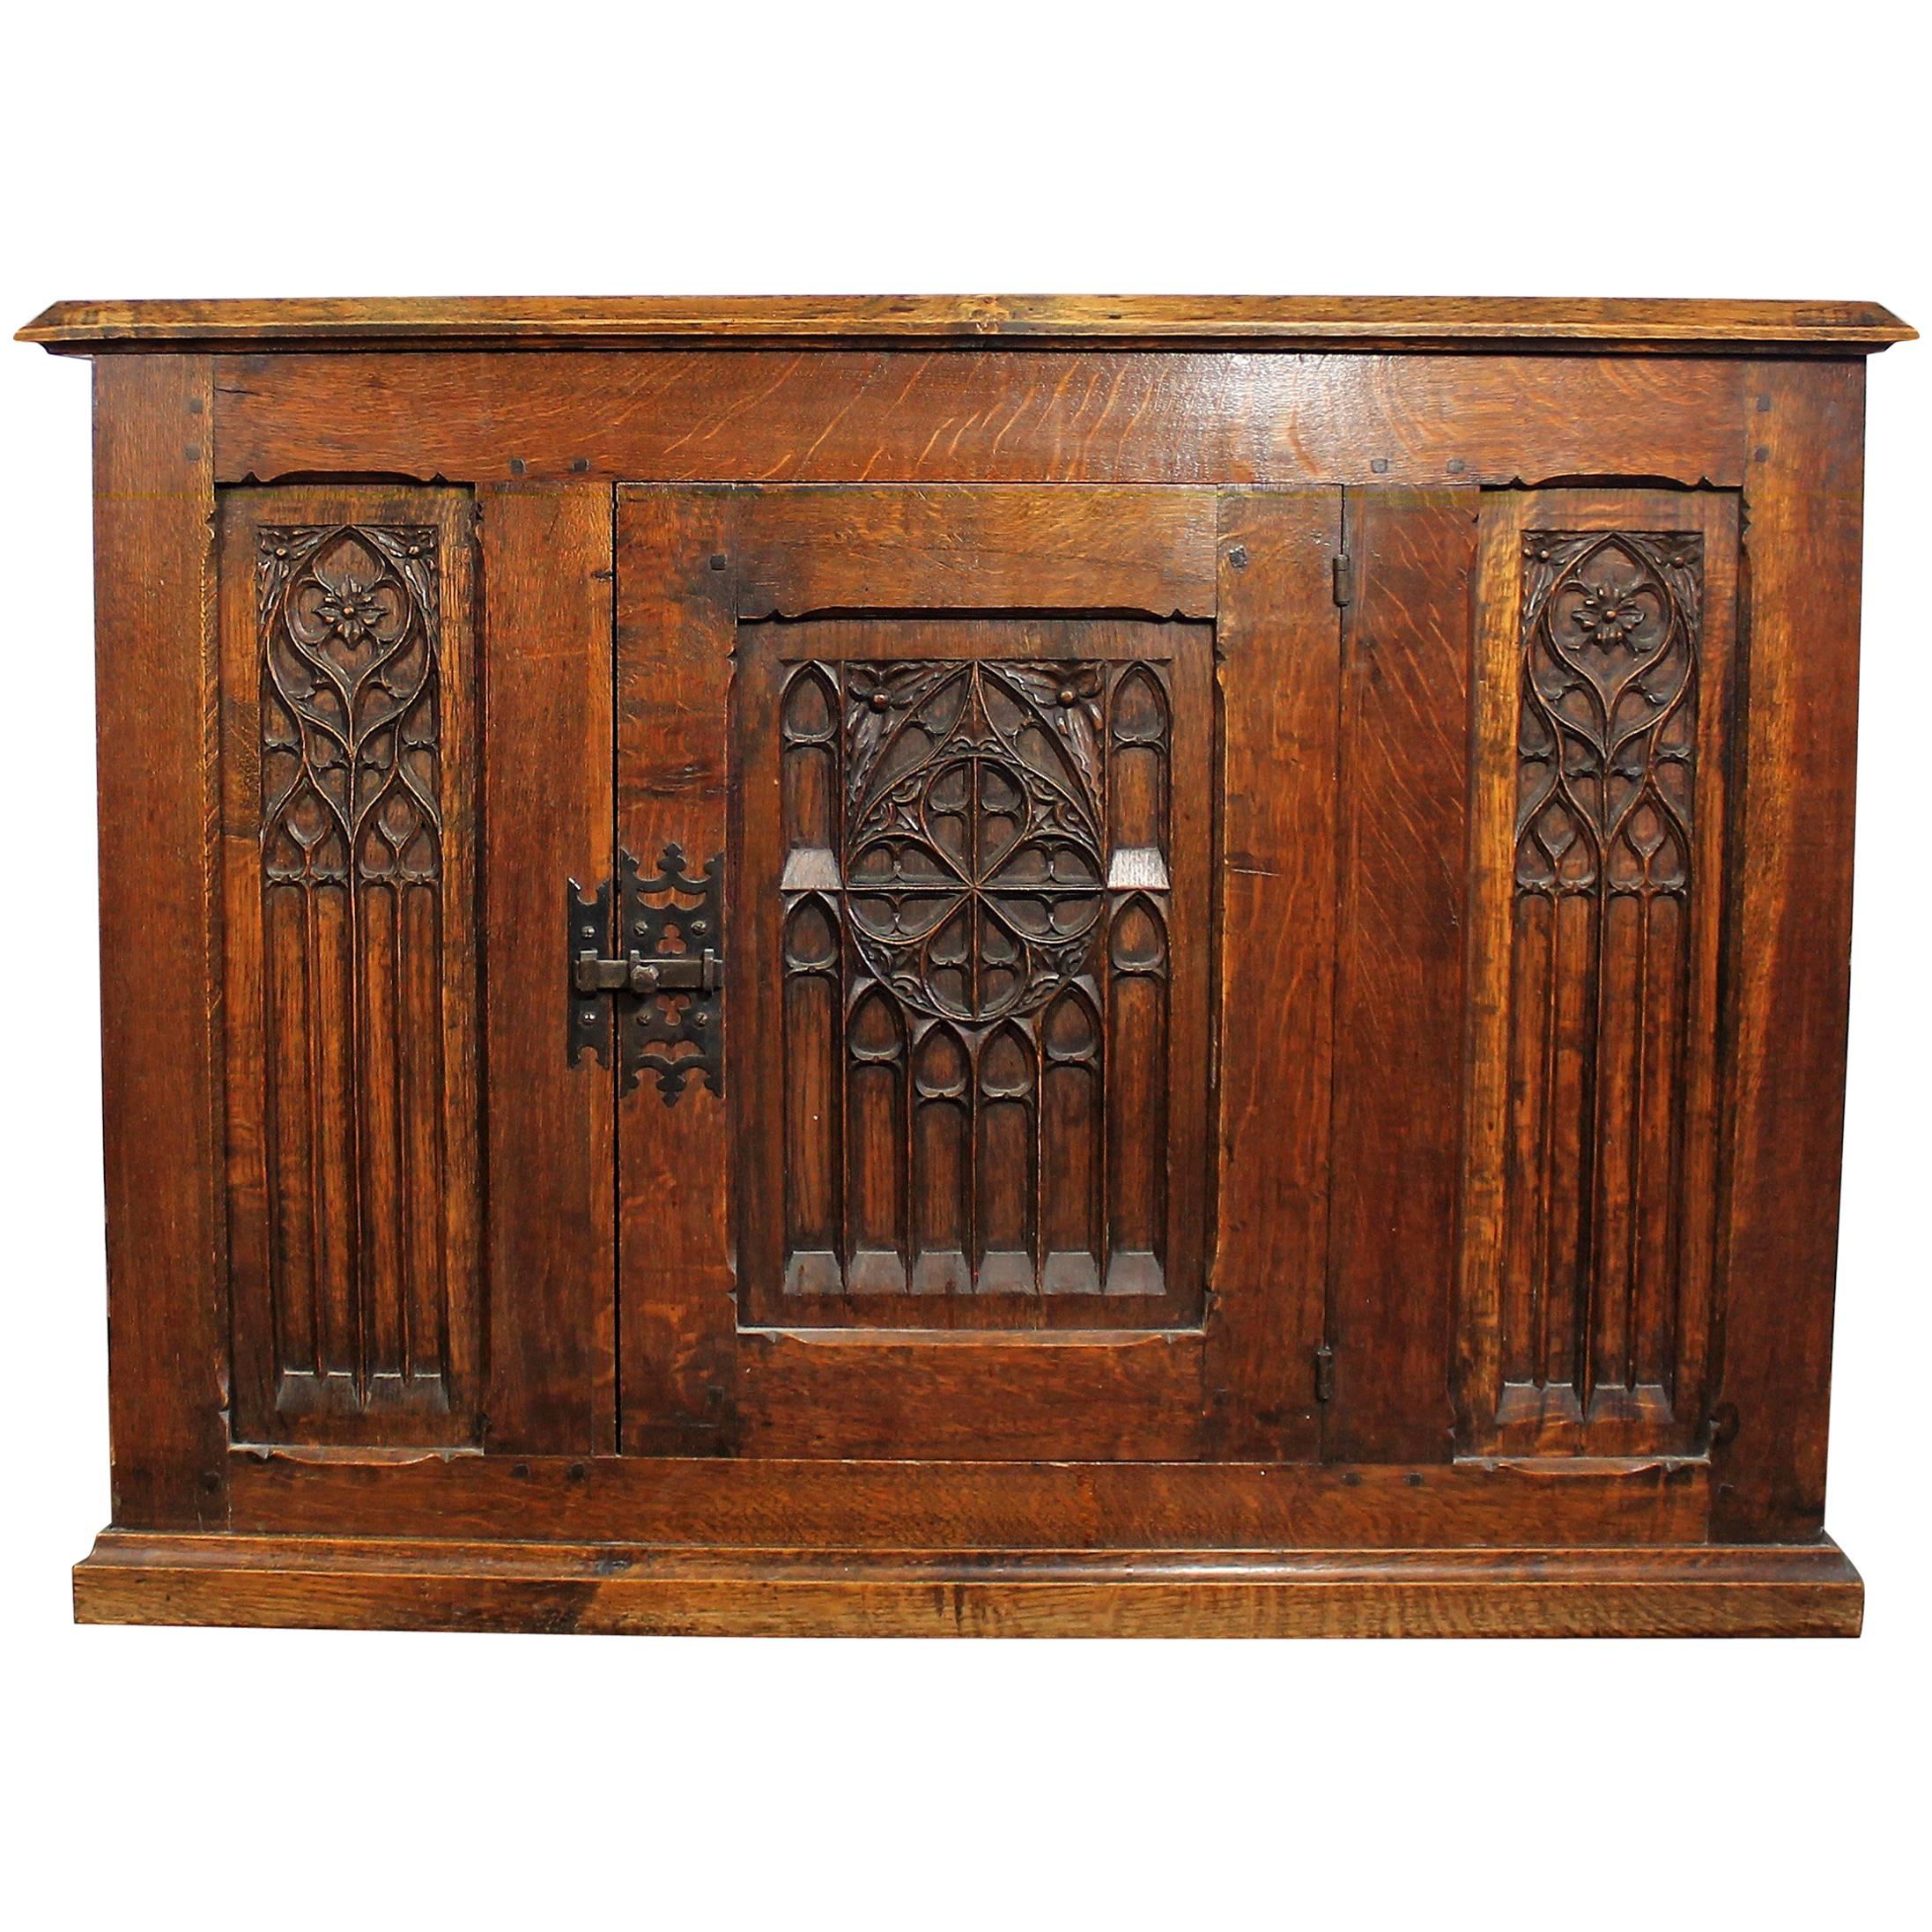 Gothic Revival Armoire with an Oak Door